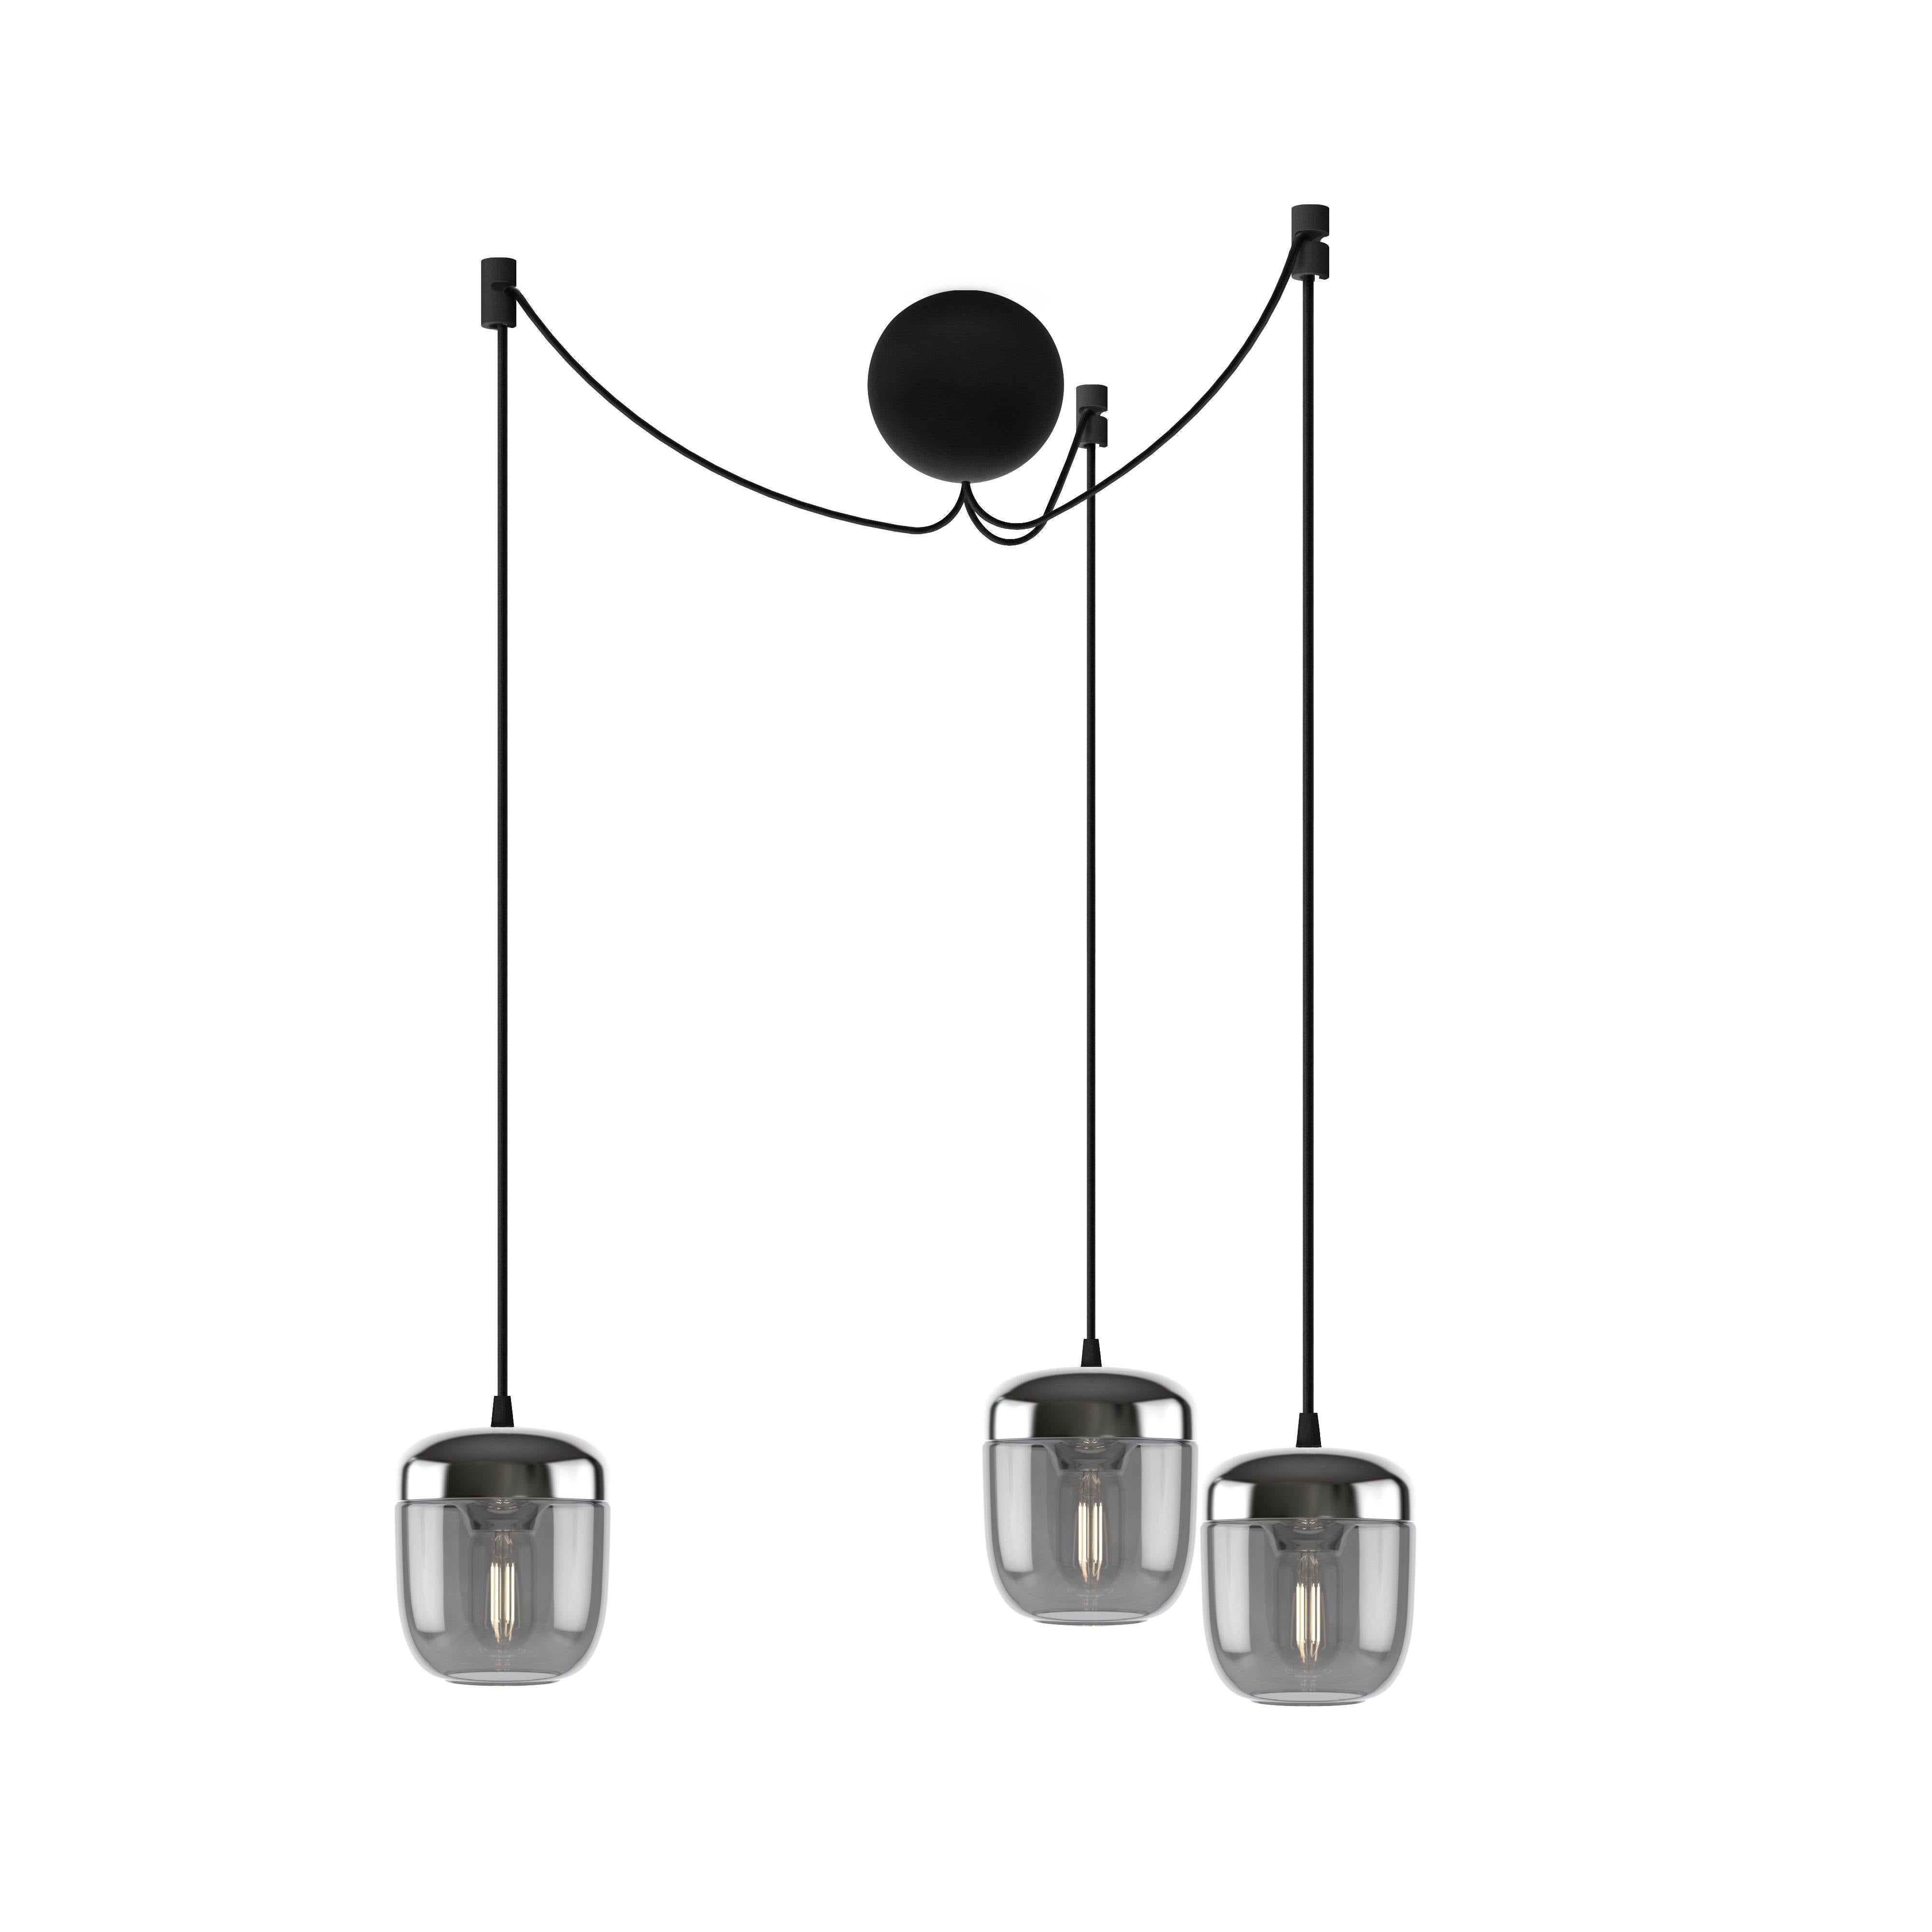 Acorn 3 light set from Umage in Smoked Steel